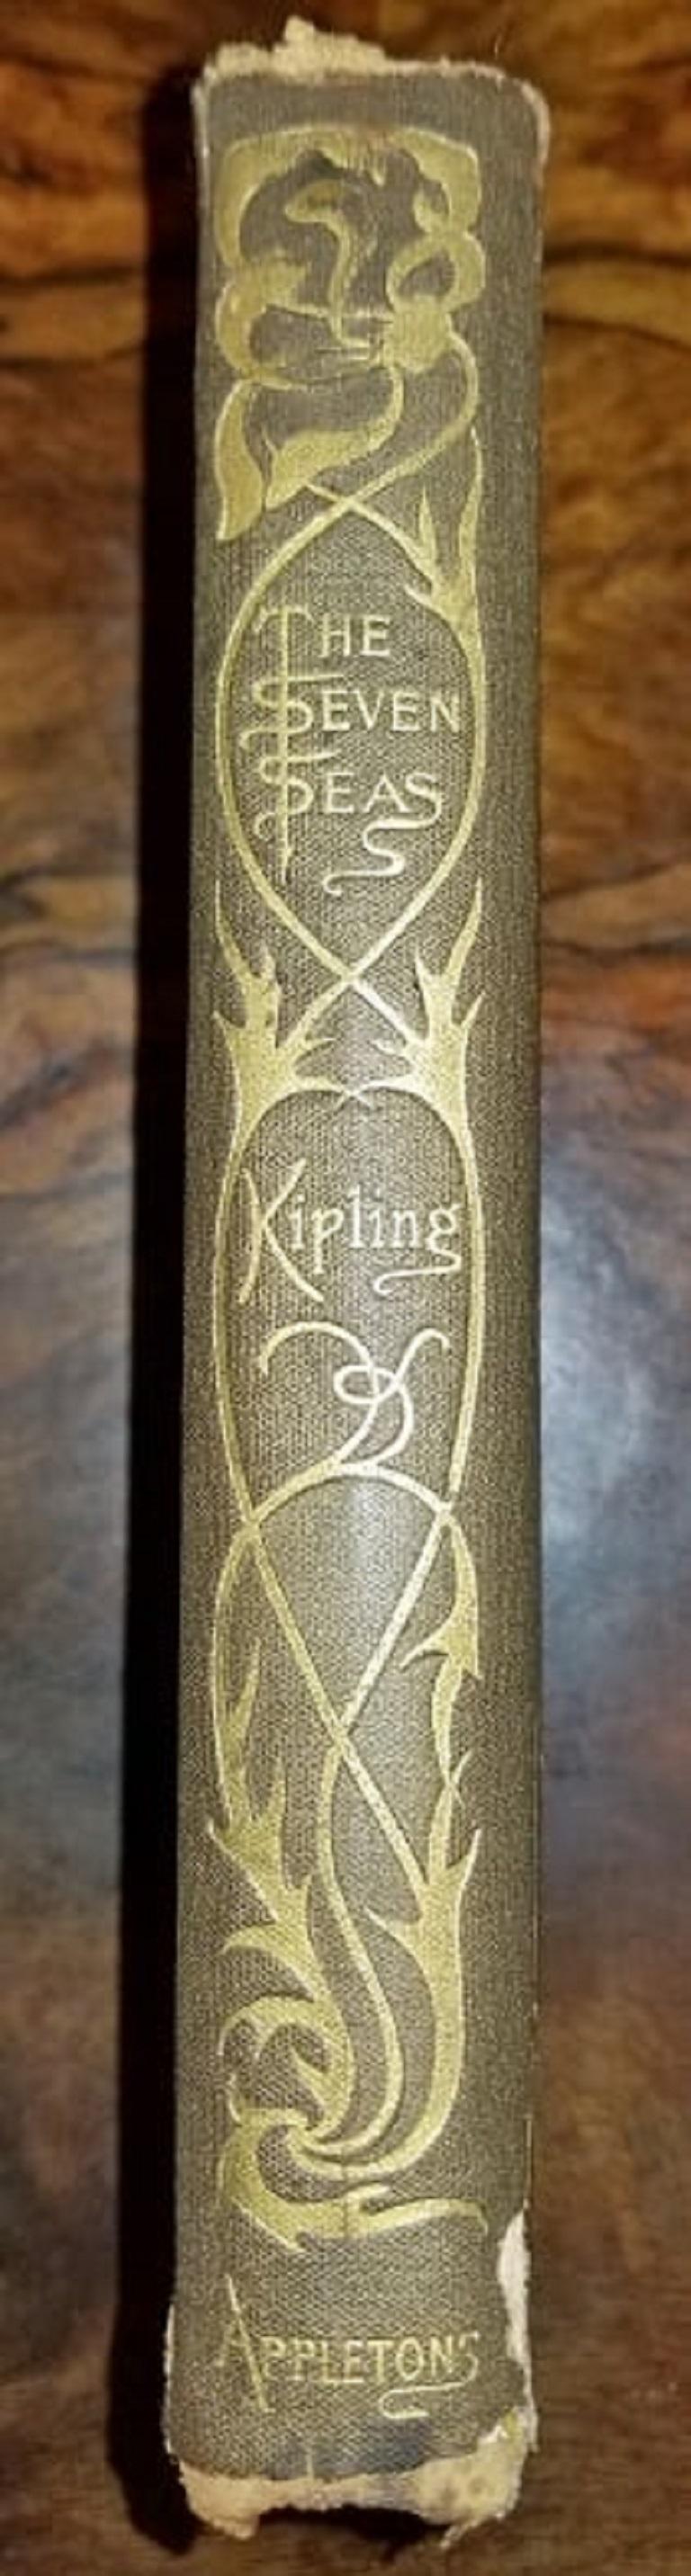 Art Nouveau The Seven Seas by Rudyard Kipling First Edition For Sale